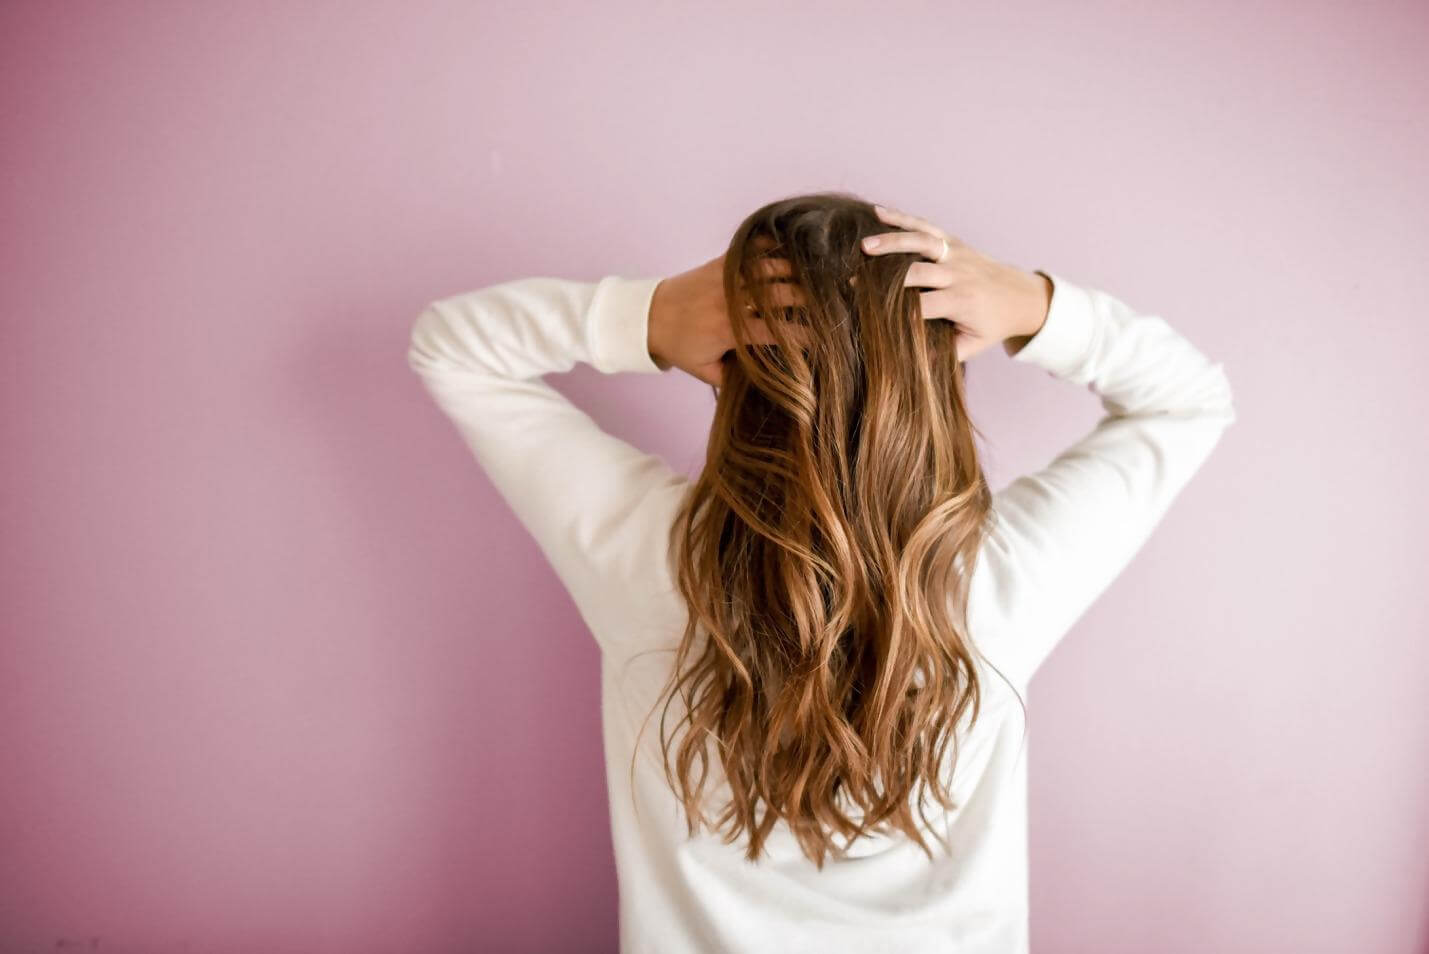 What are some Biotin Shampoo side effects?